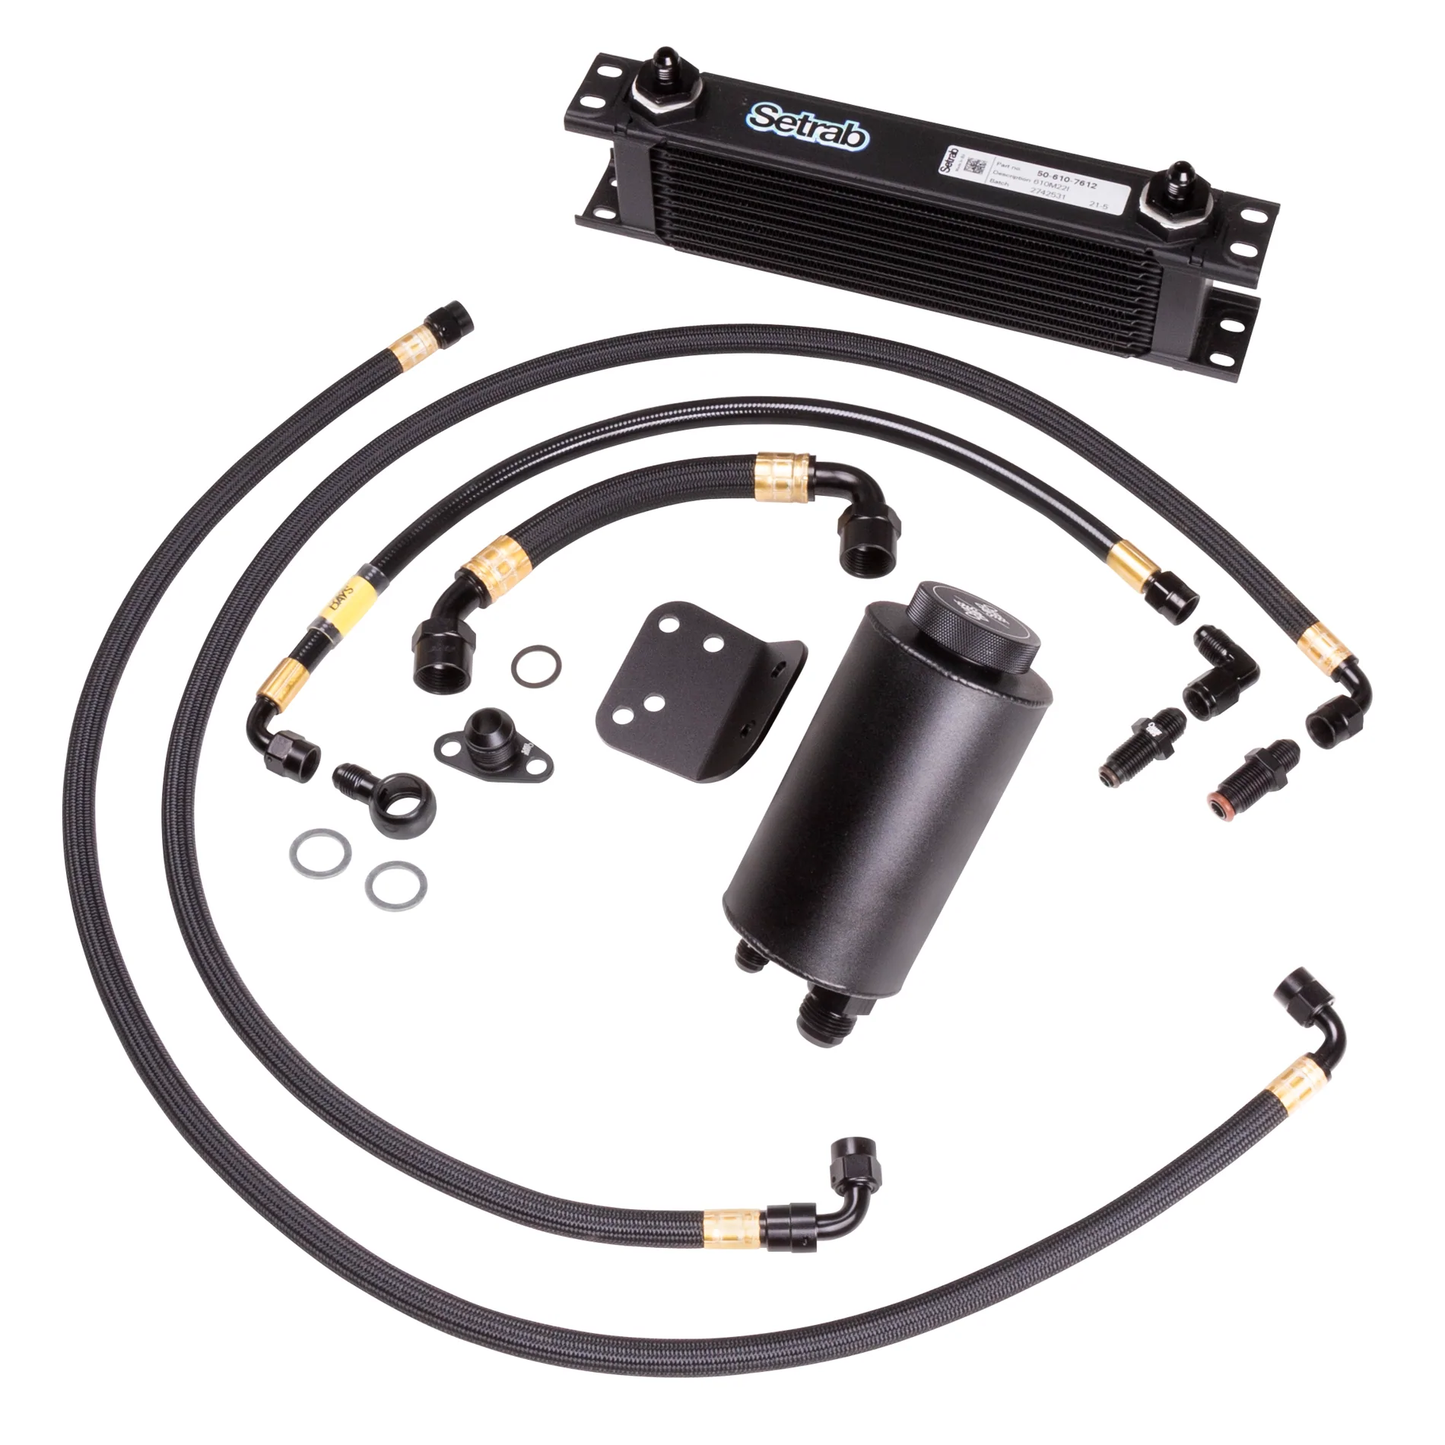 Chase Bays - Power Steering Kit - Nissan 240sx S13 / S14 / S15 with KA24DE (CB-N-PSK4)